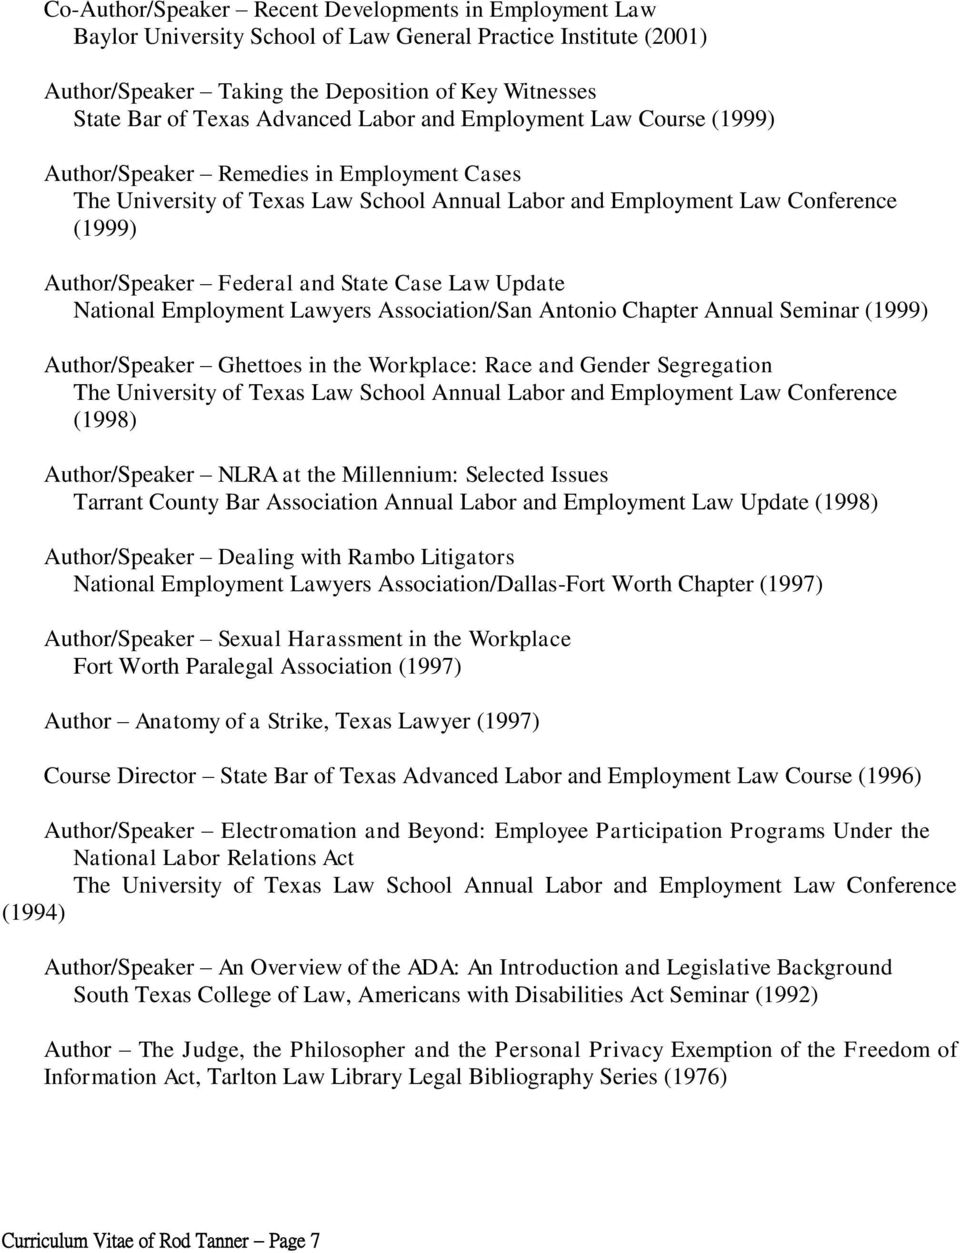 Chapter Annual Seminar (1999) Author/Speaker Ghettoes in the Workplace: Race and Gender Segregation (1998) Author/Speaker NLRA at the Millennium: Selected Issues Tarrant County Bar Association Annual